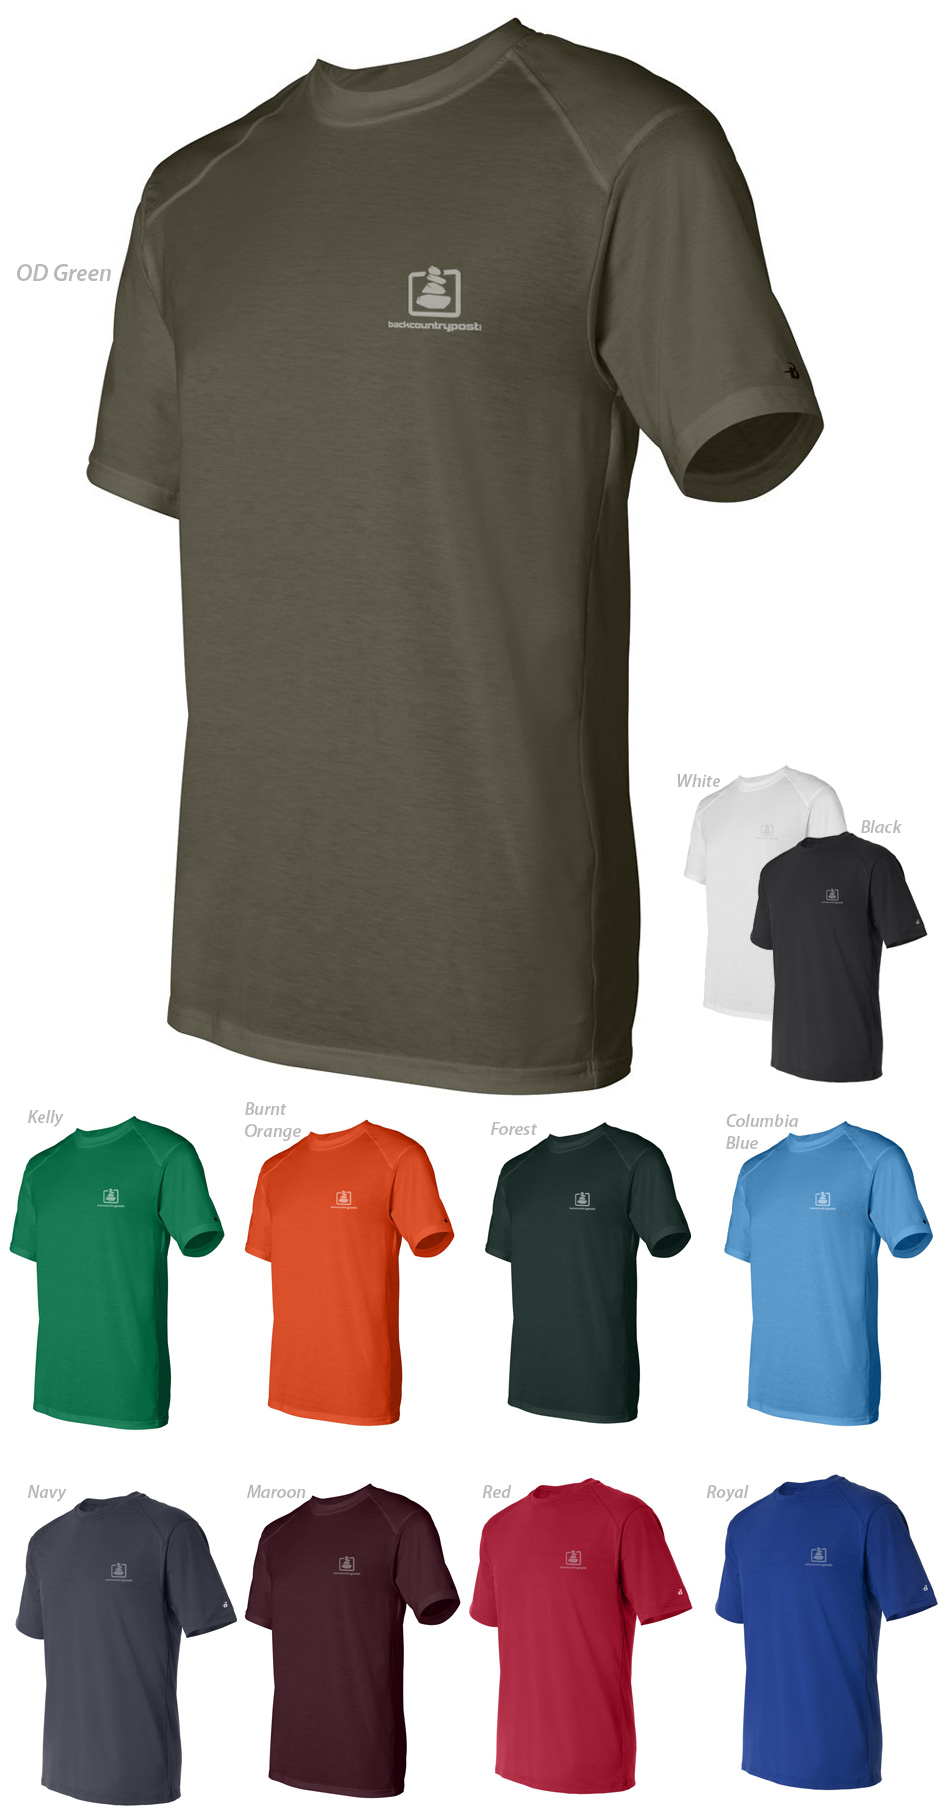 all-colors-synthetic-shirt.jpg